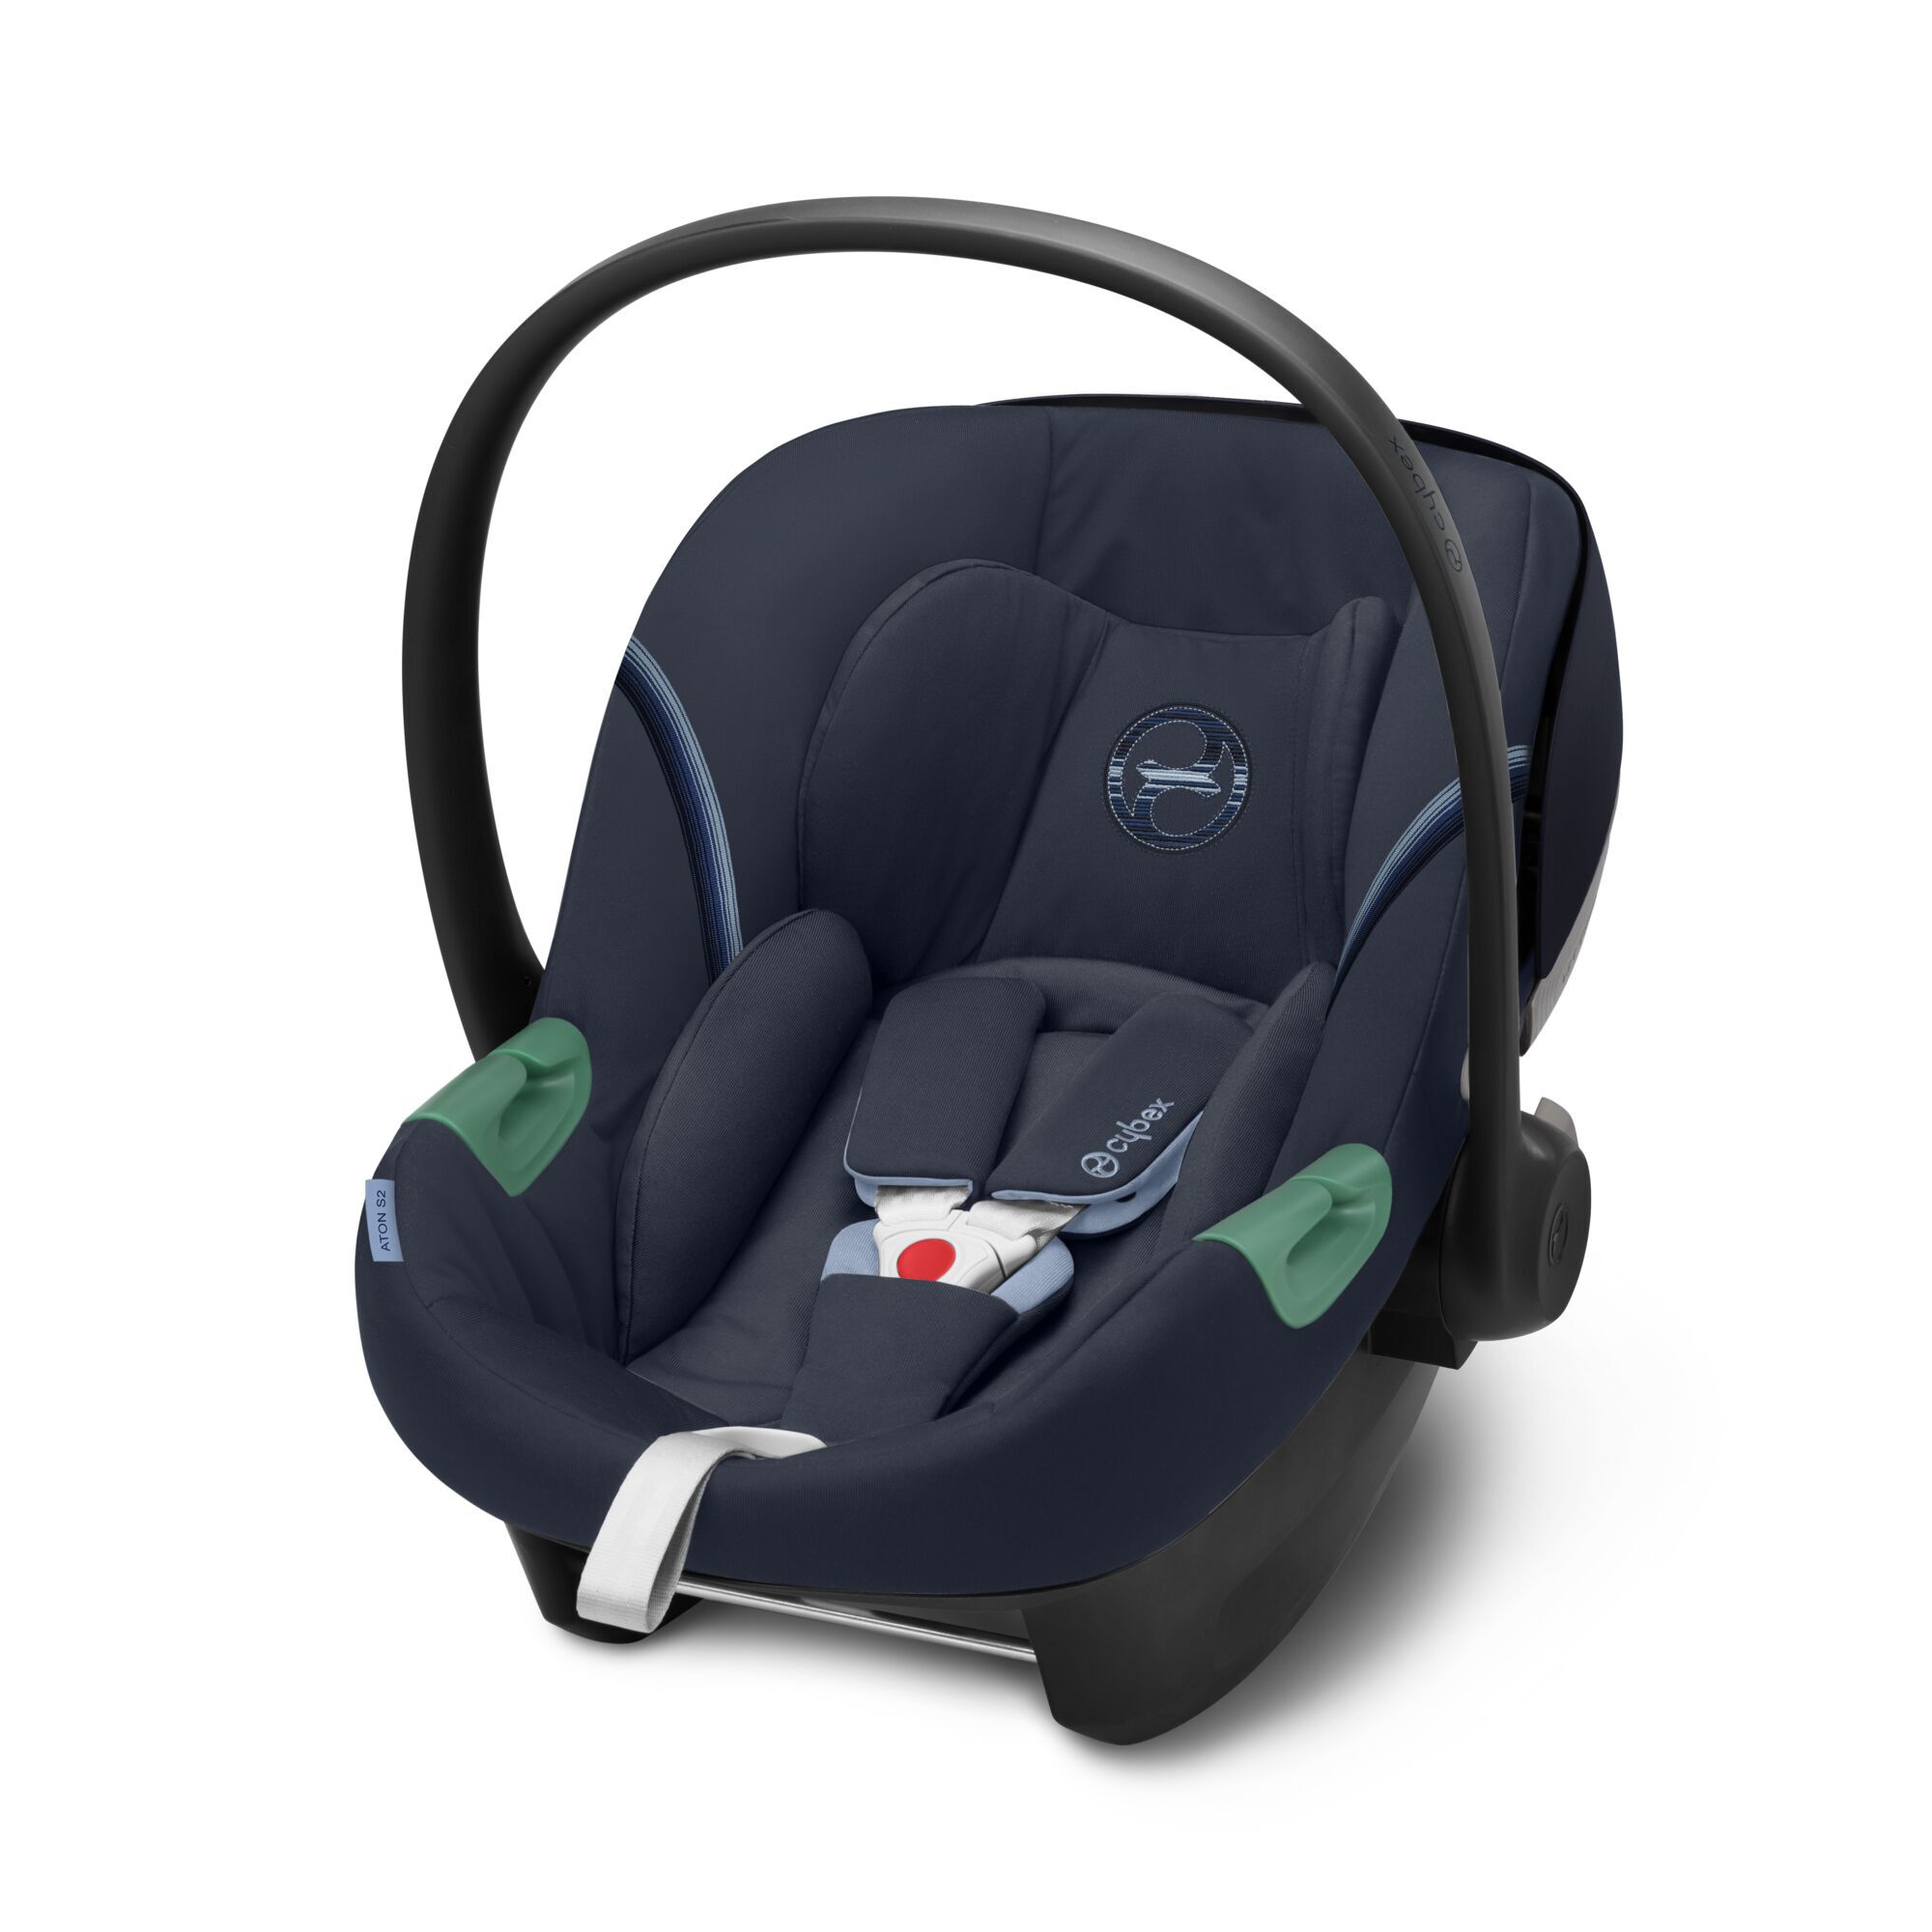 Cybex Cybex Aton infant car seat user manuals instructions 